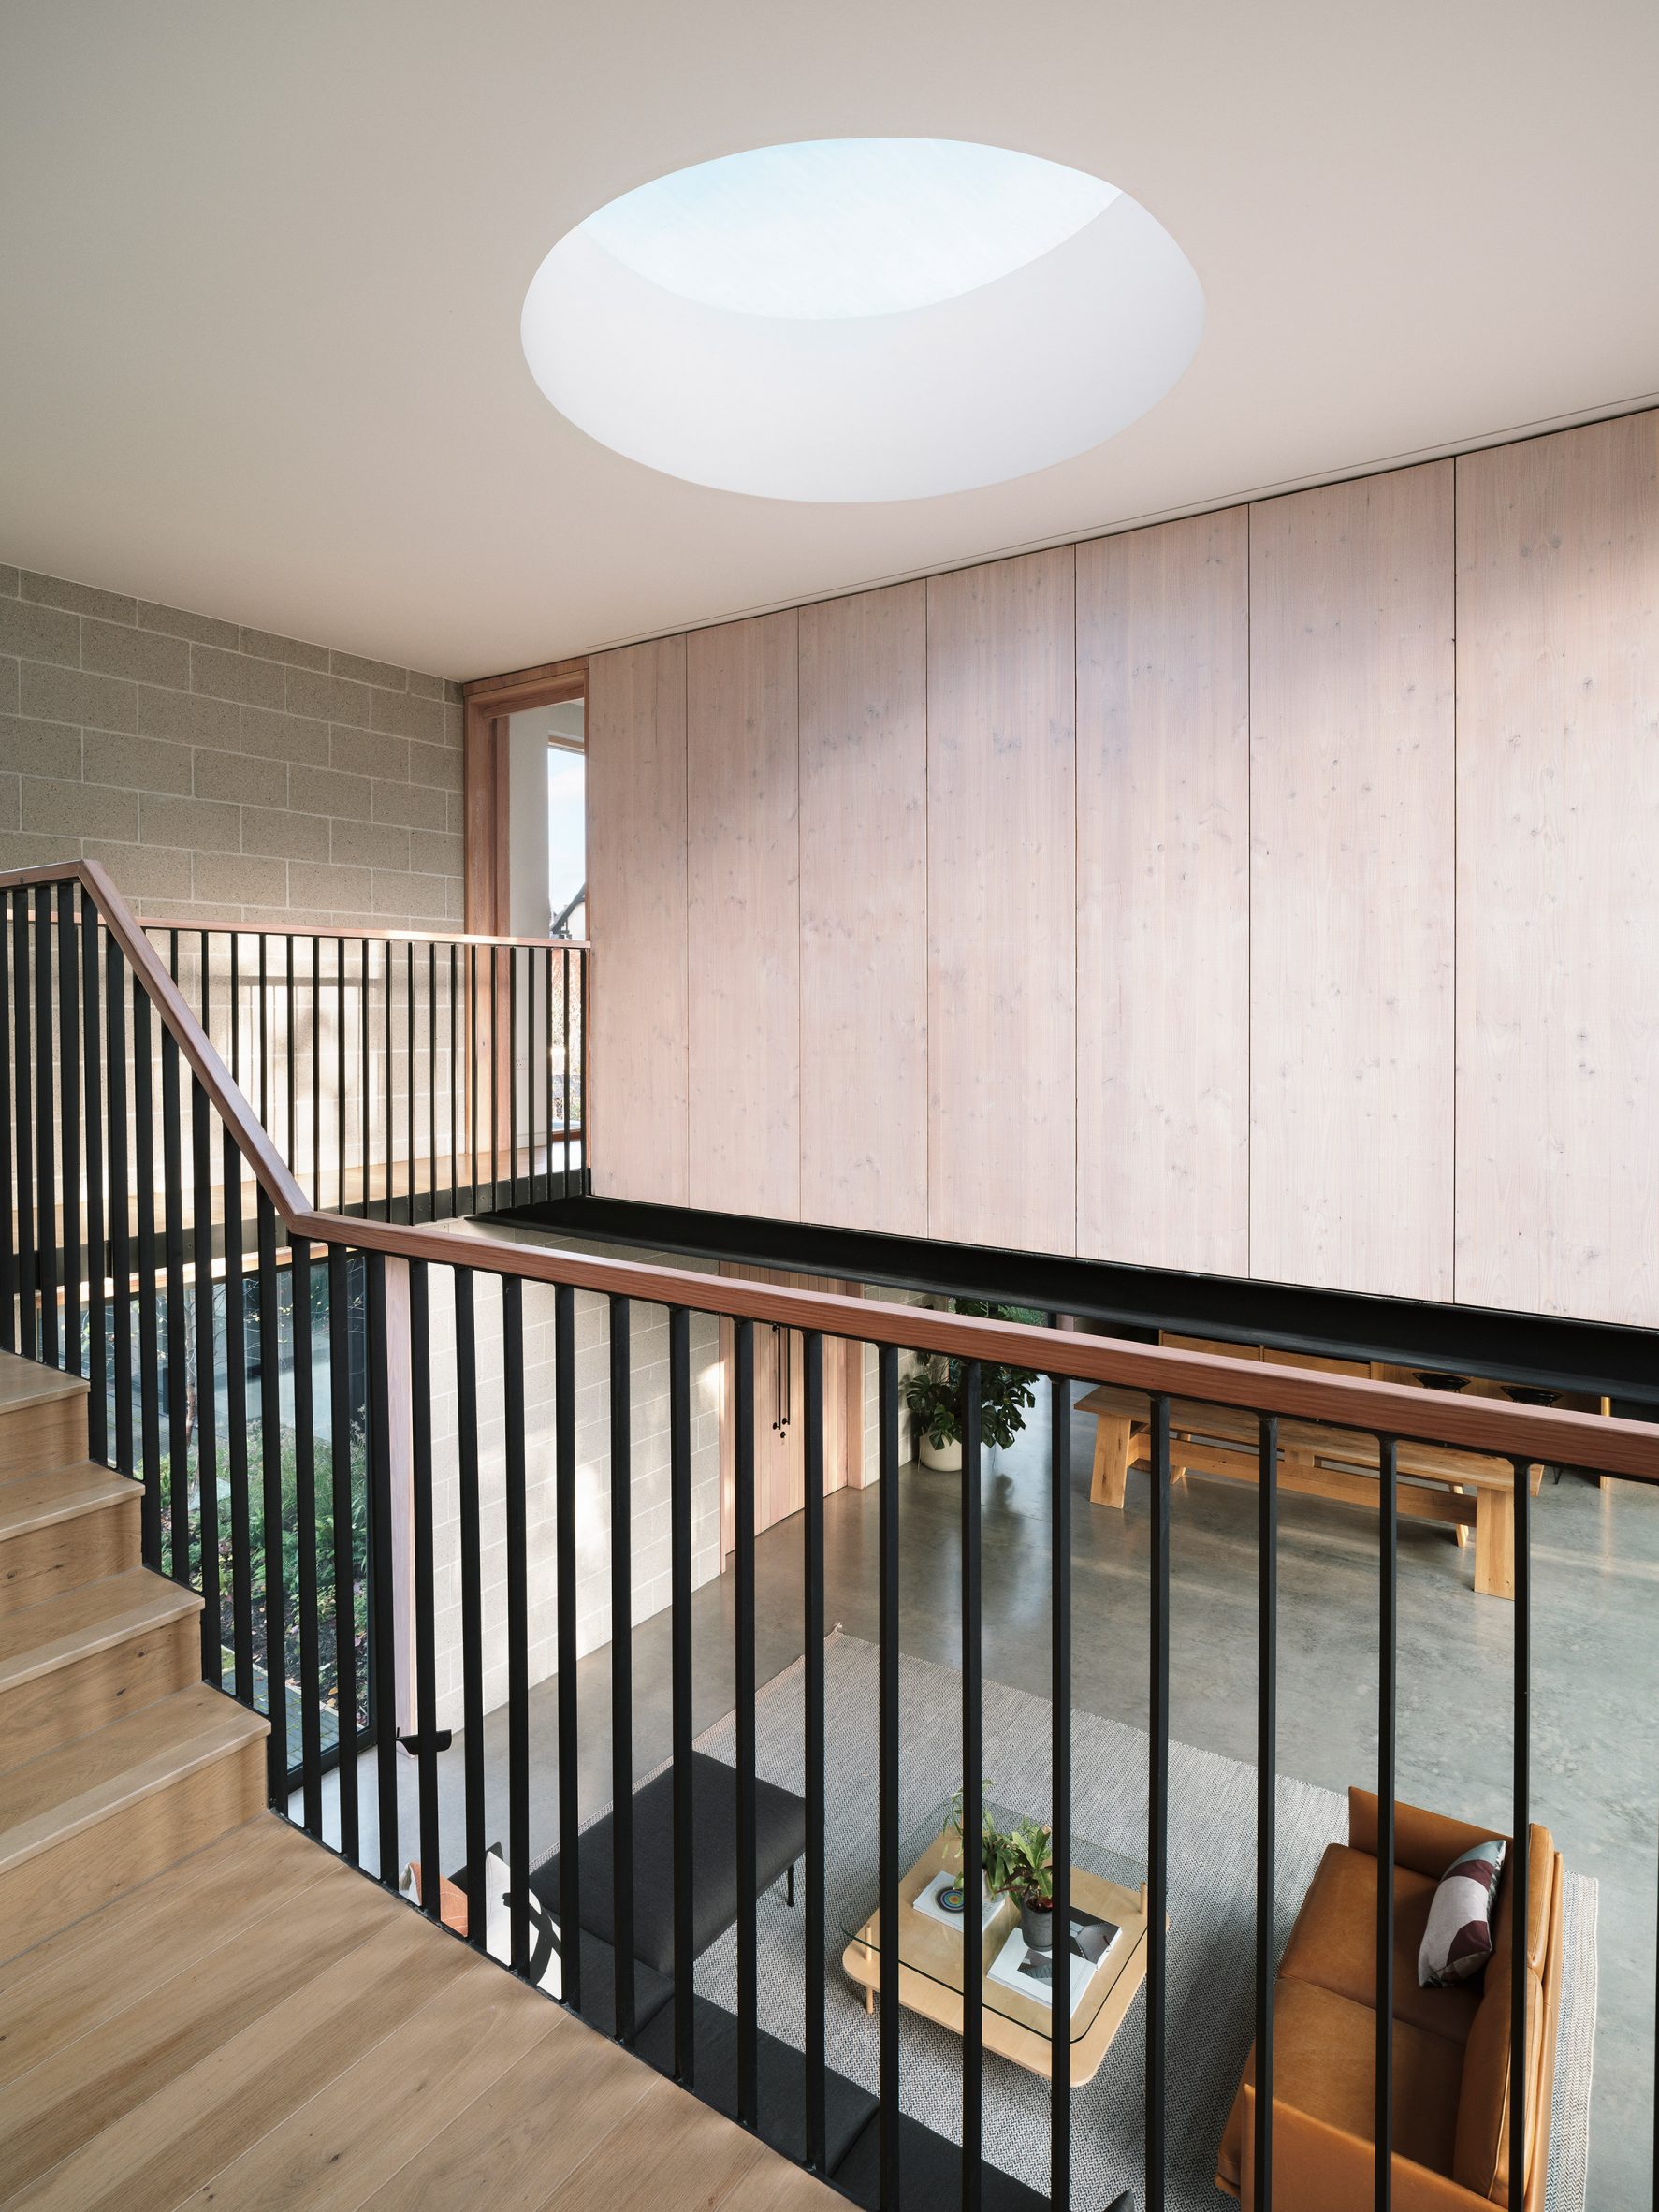 Circular roof light over a stairwell over a double-height open plan living space